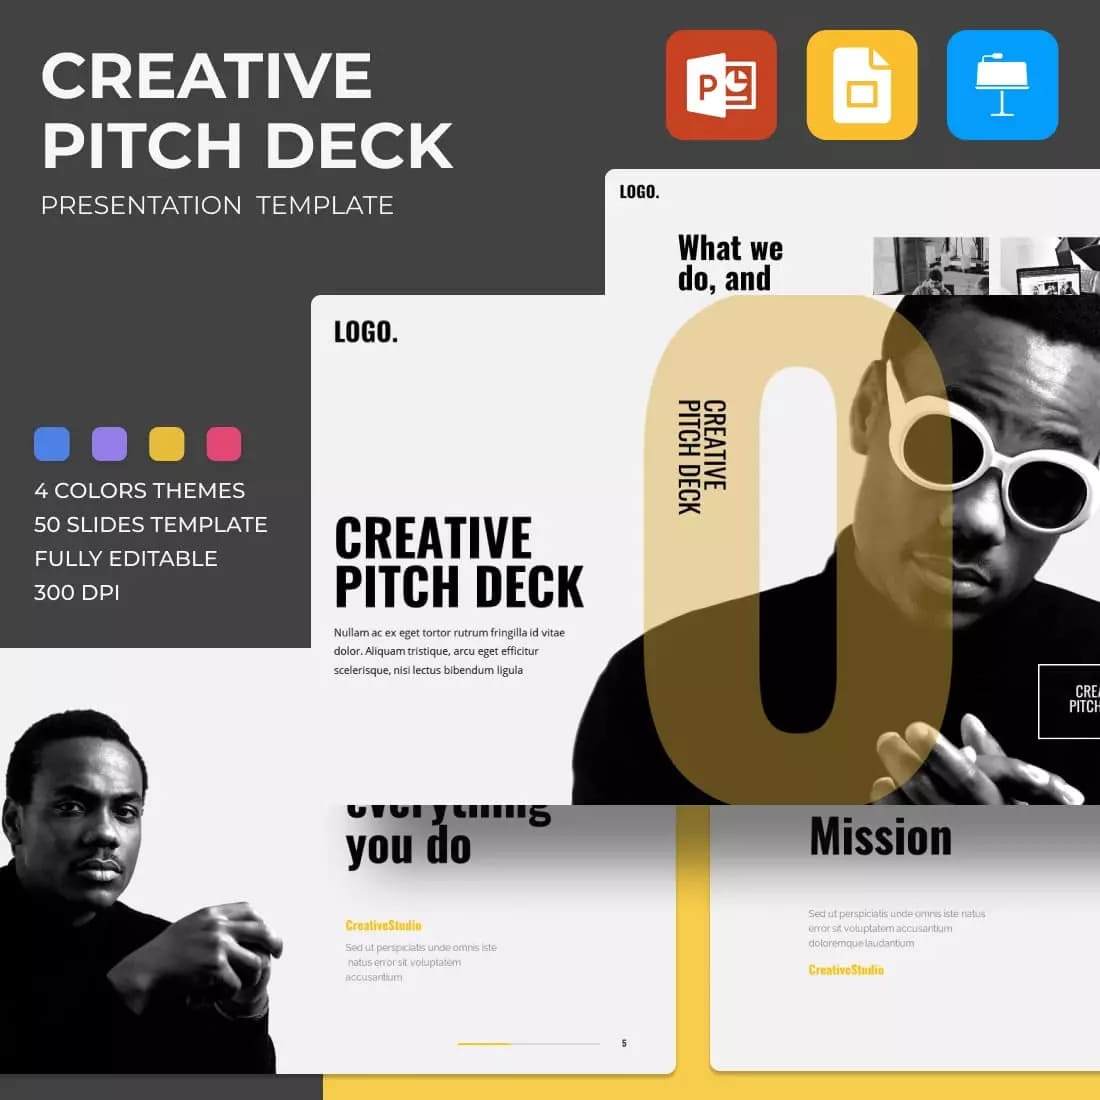 Creative Pitch Deck Presentation Template Preview image.